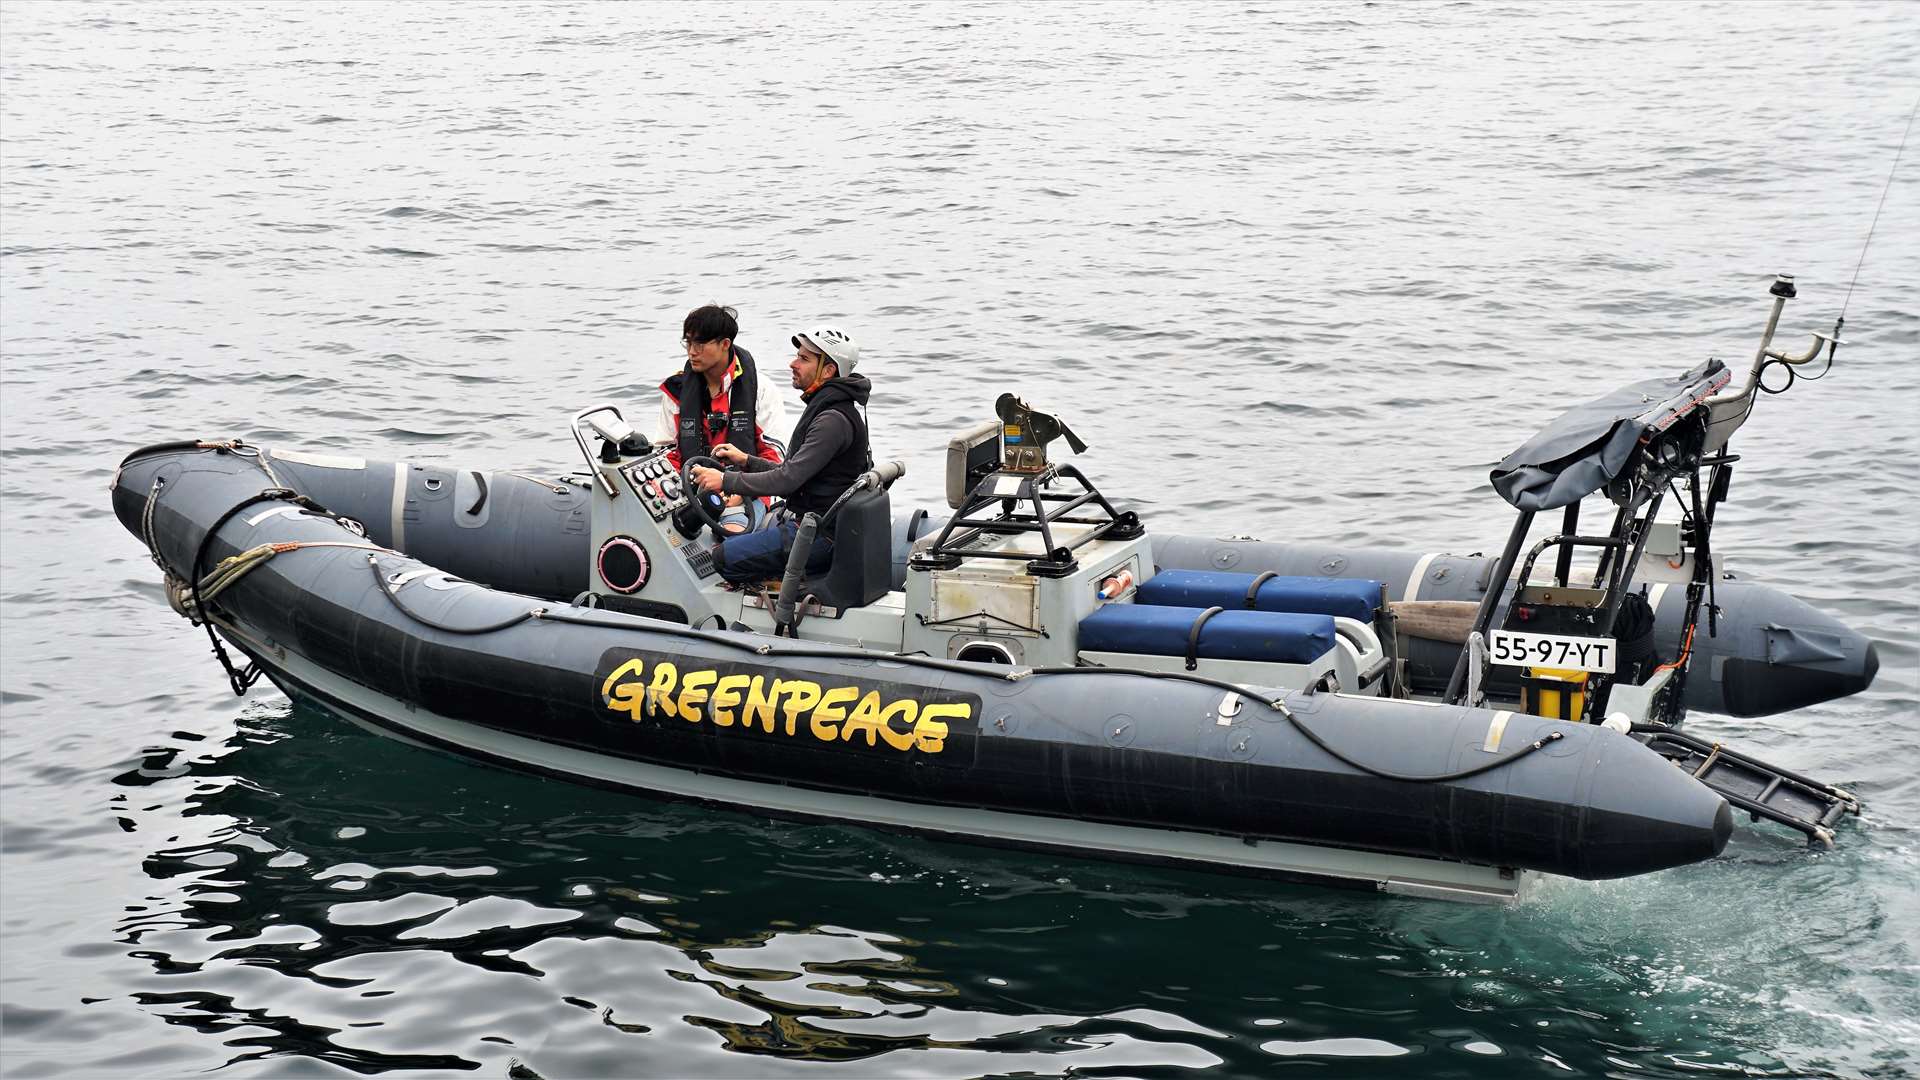 Rigid inflatable boats ferried Greenpeace activists and members of the press out to Rainbow Warrior. Pictures: DGS